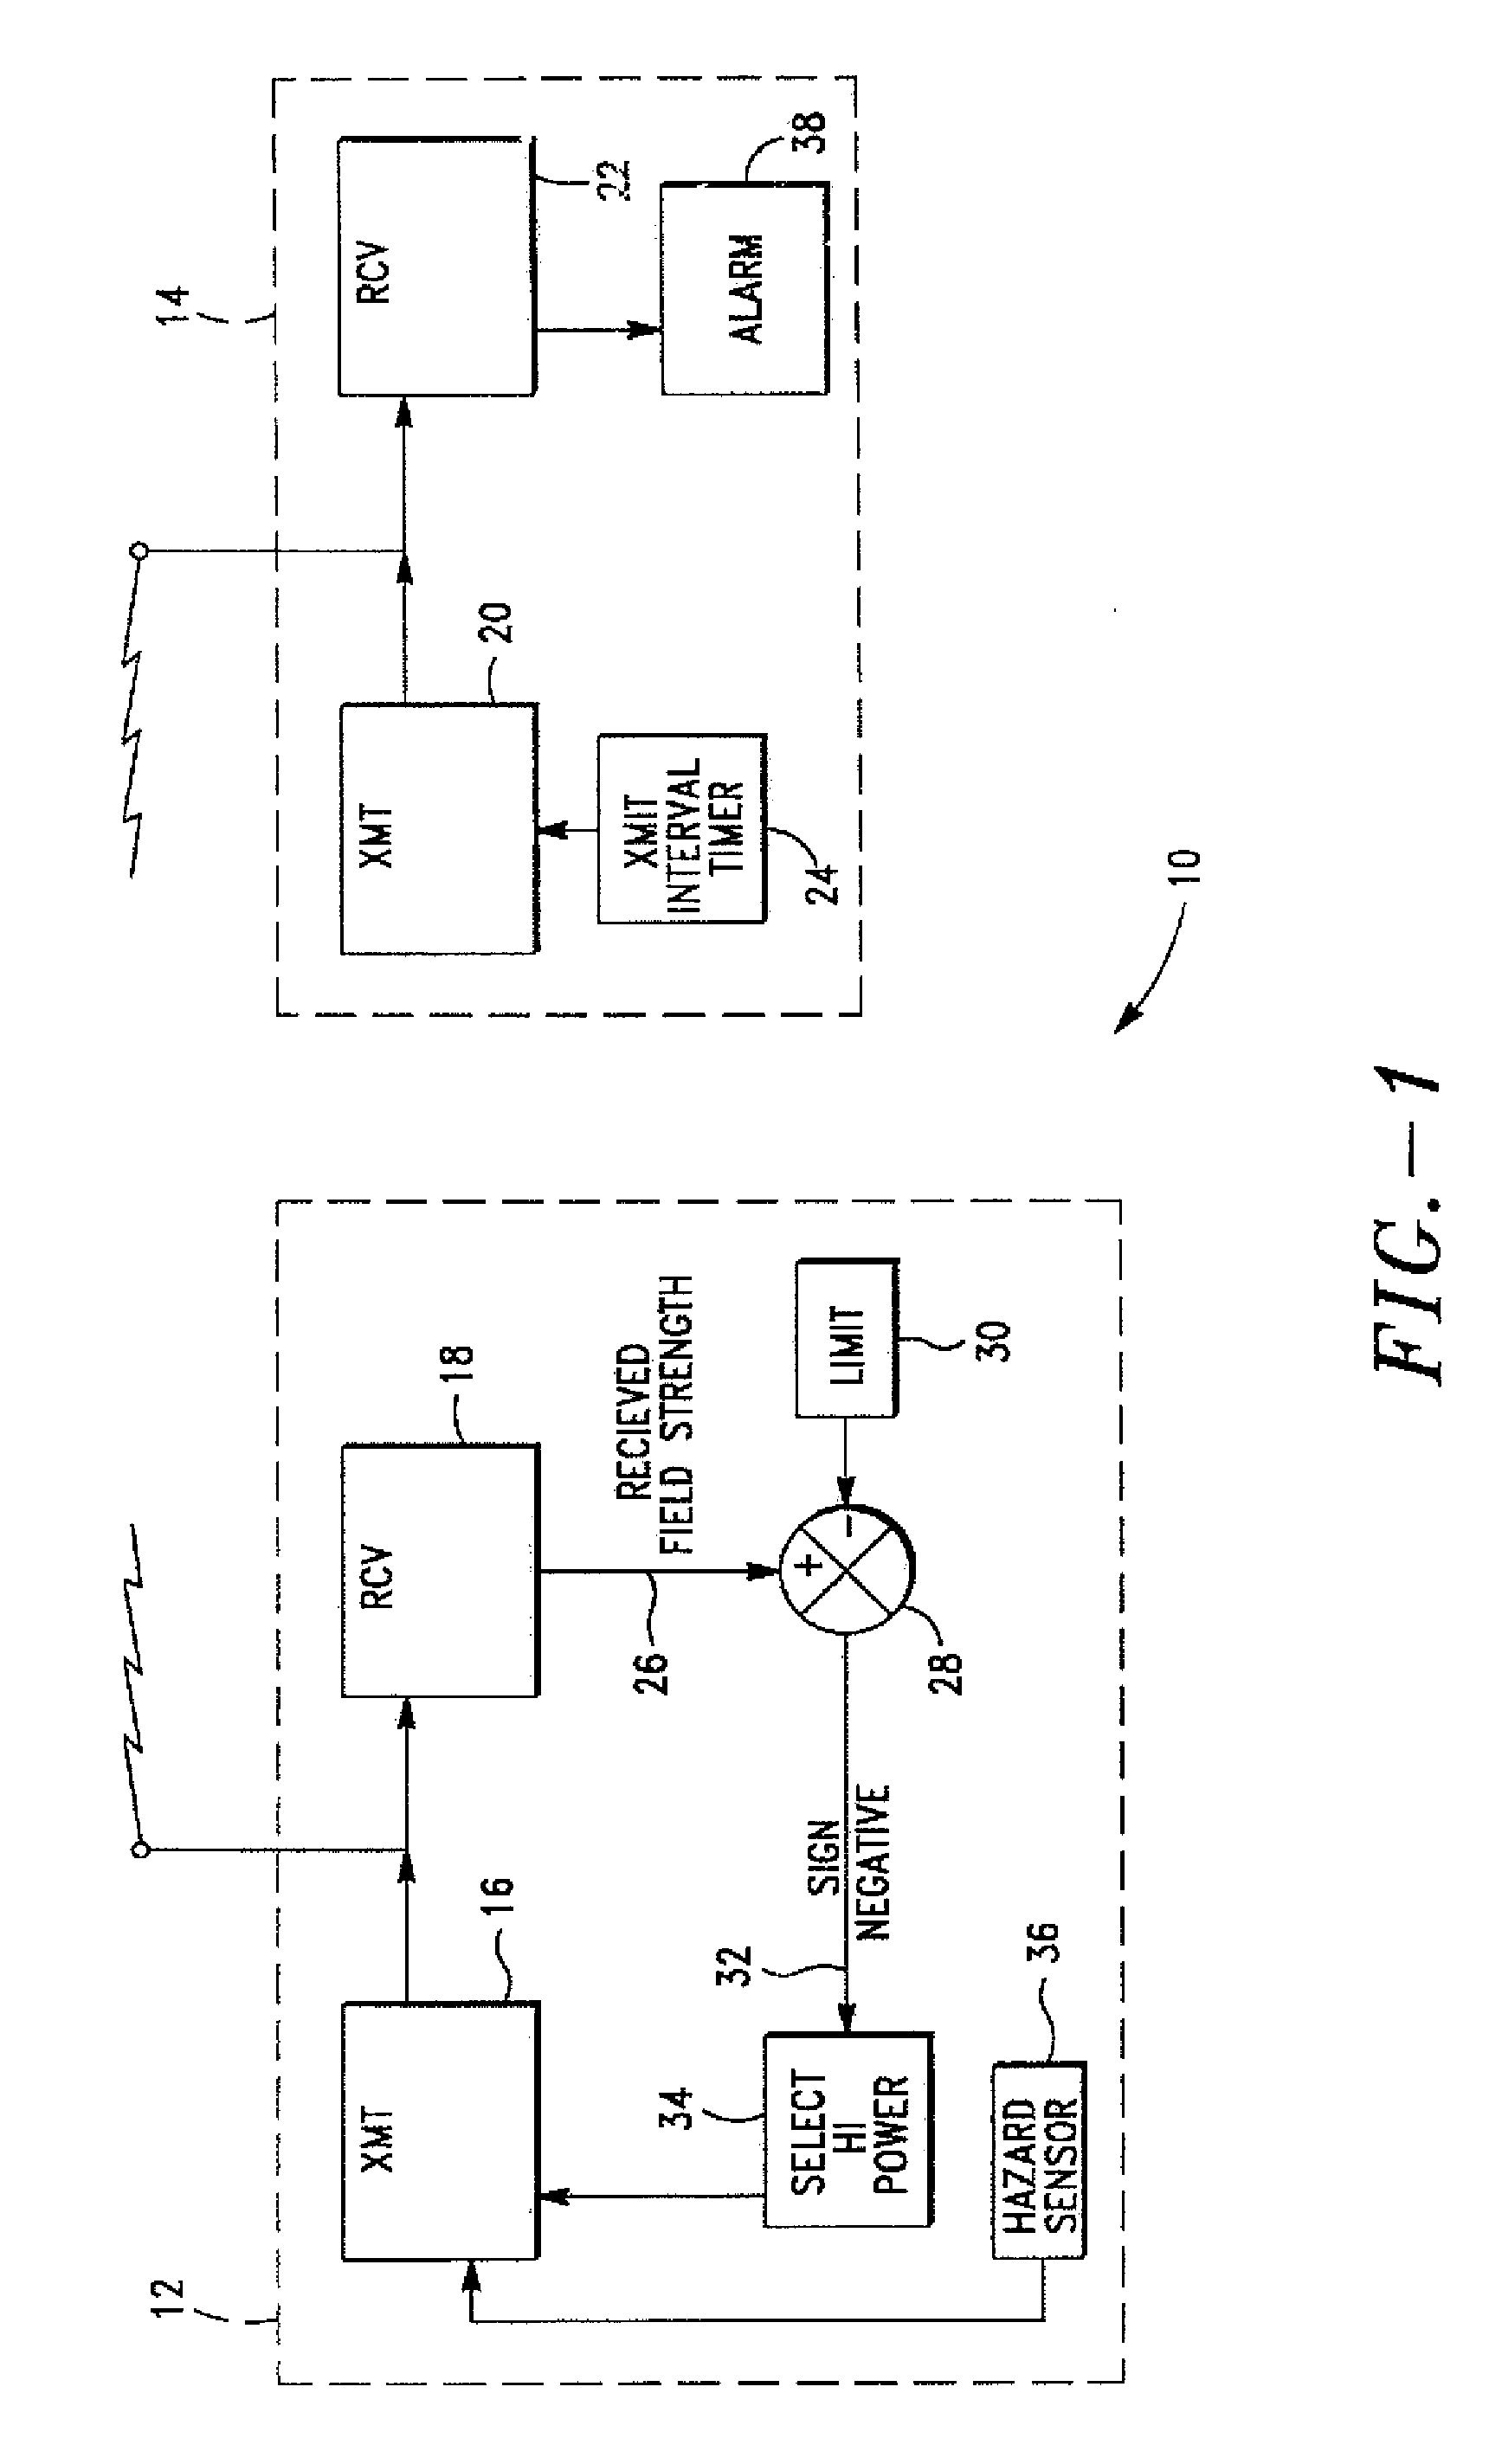 Multi-hazard alarm system using selectable power-level transmission and localization